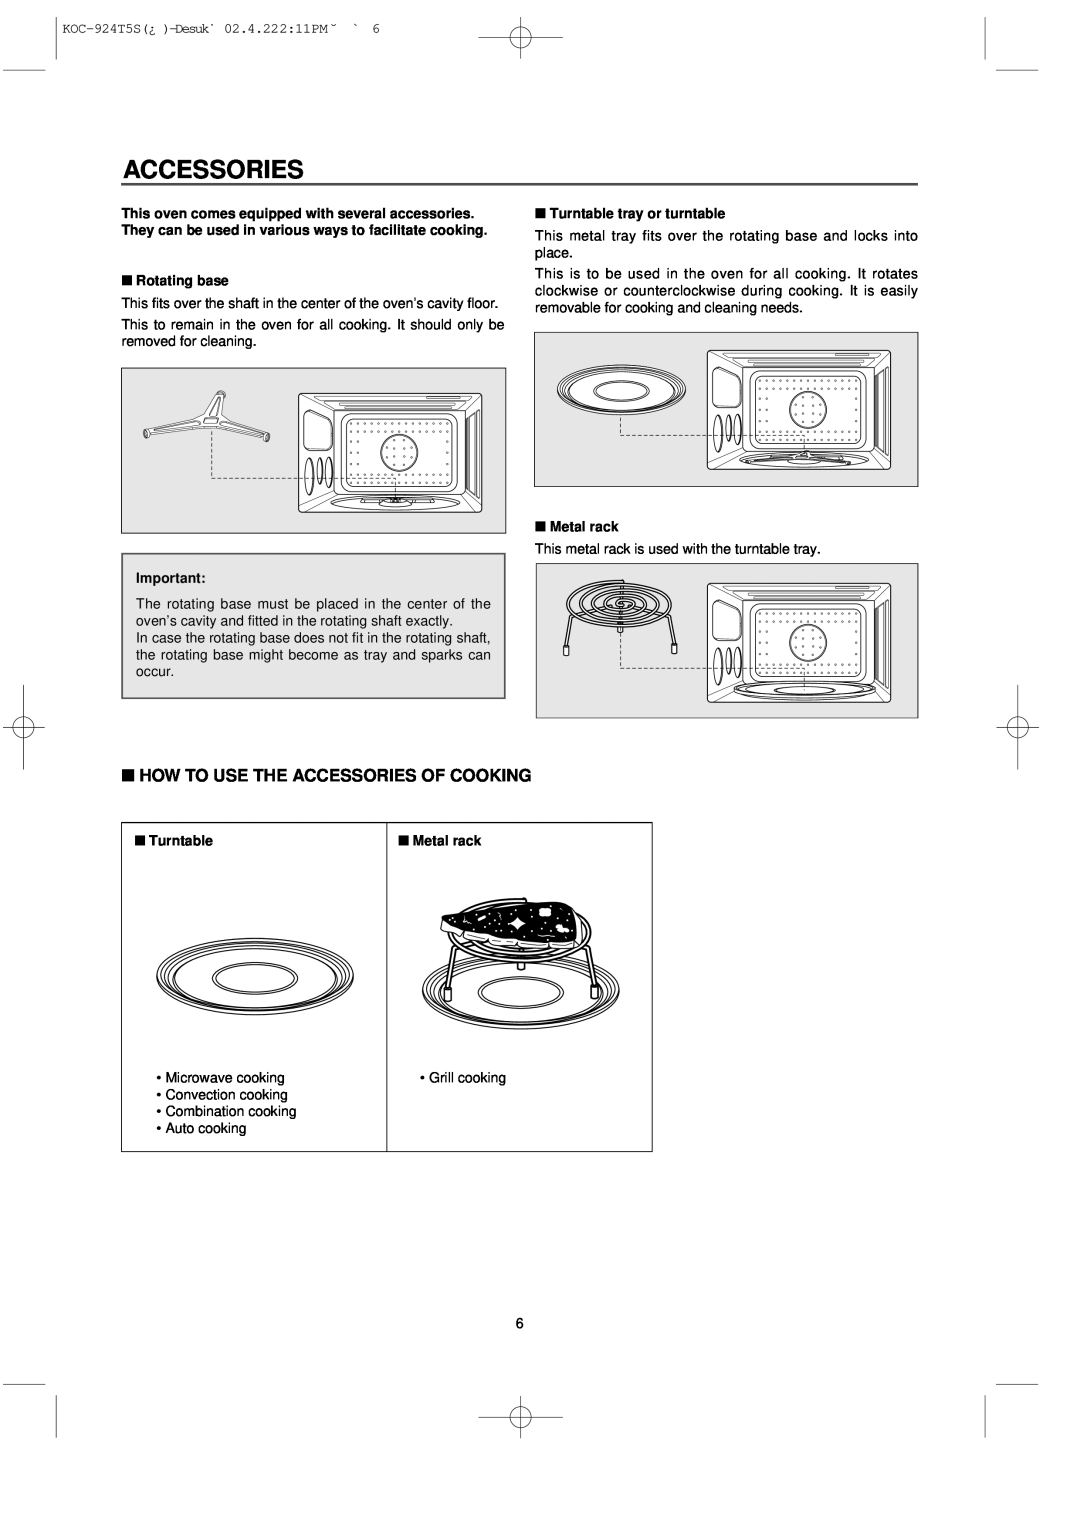 Daewoo KOC-924T owner manual How To Use The Accessories Of Cooking 